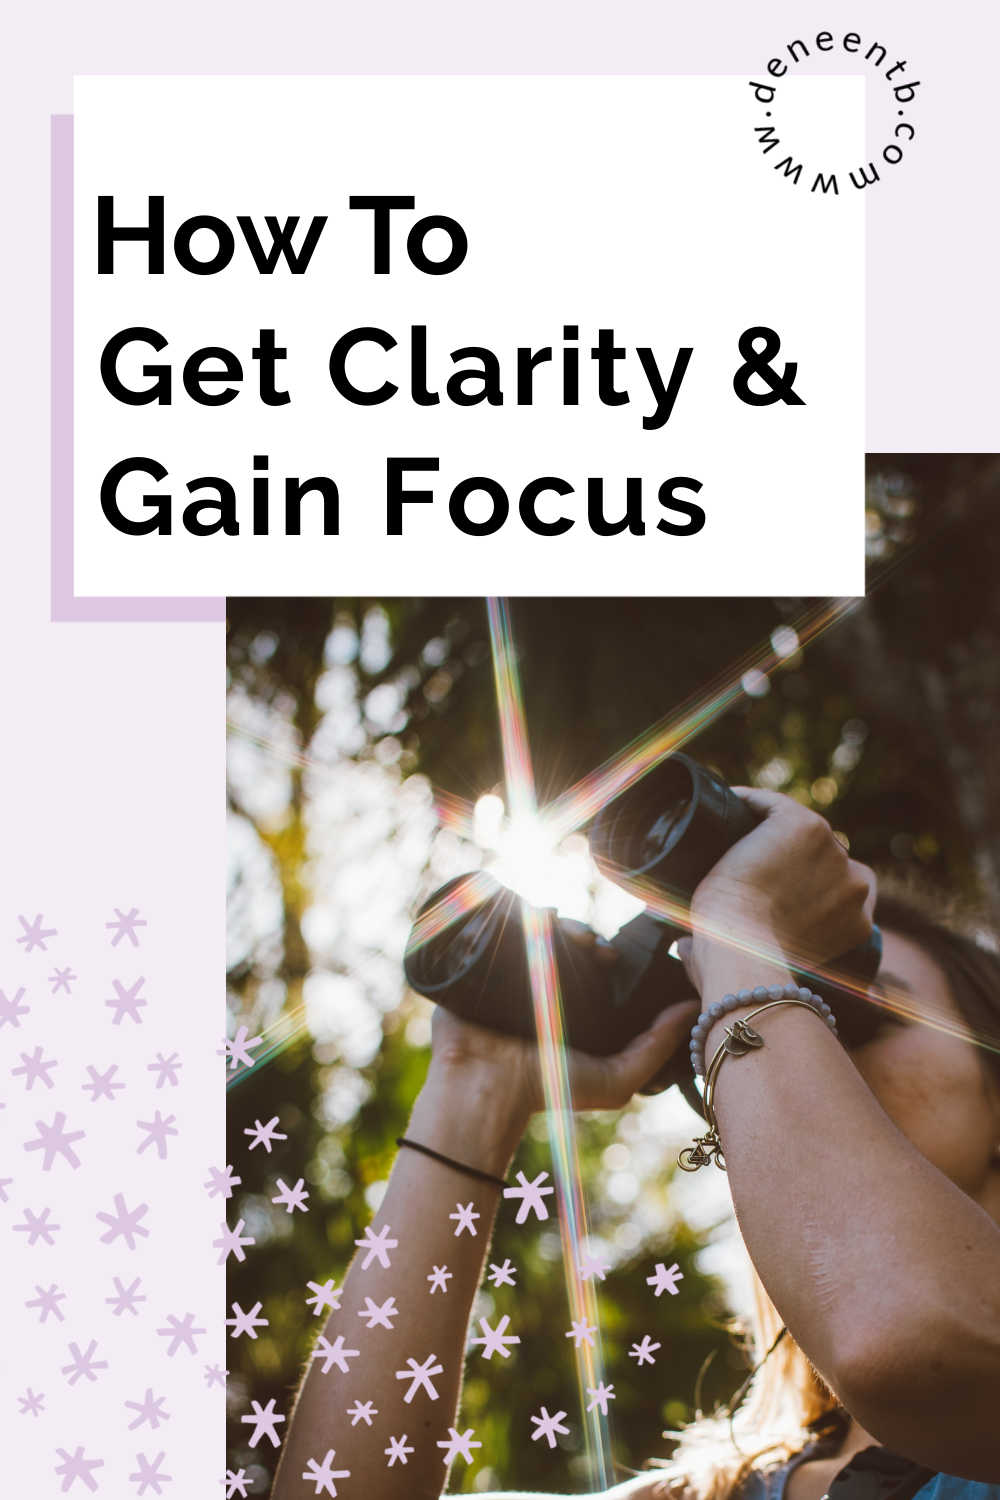 Overlay says how to get clarity and gain focus